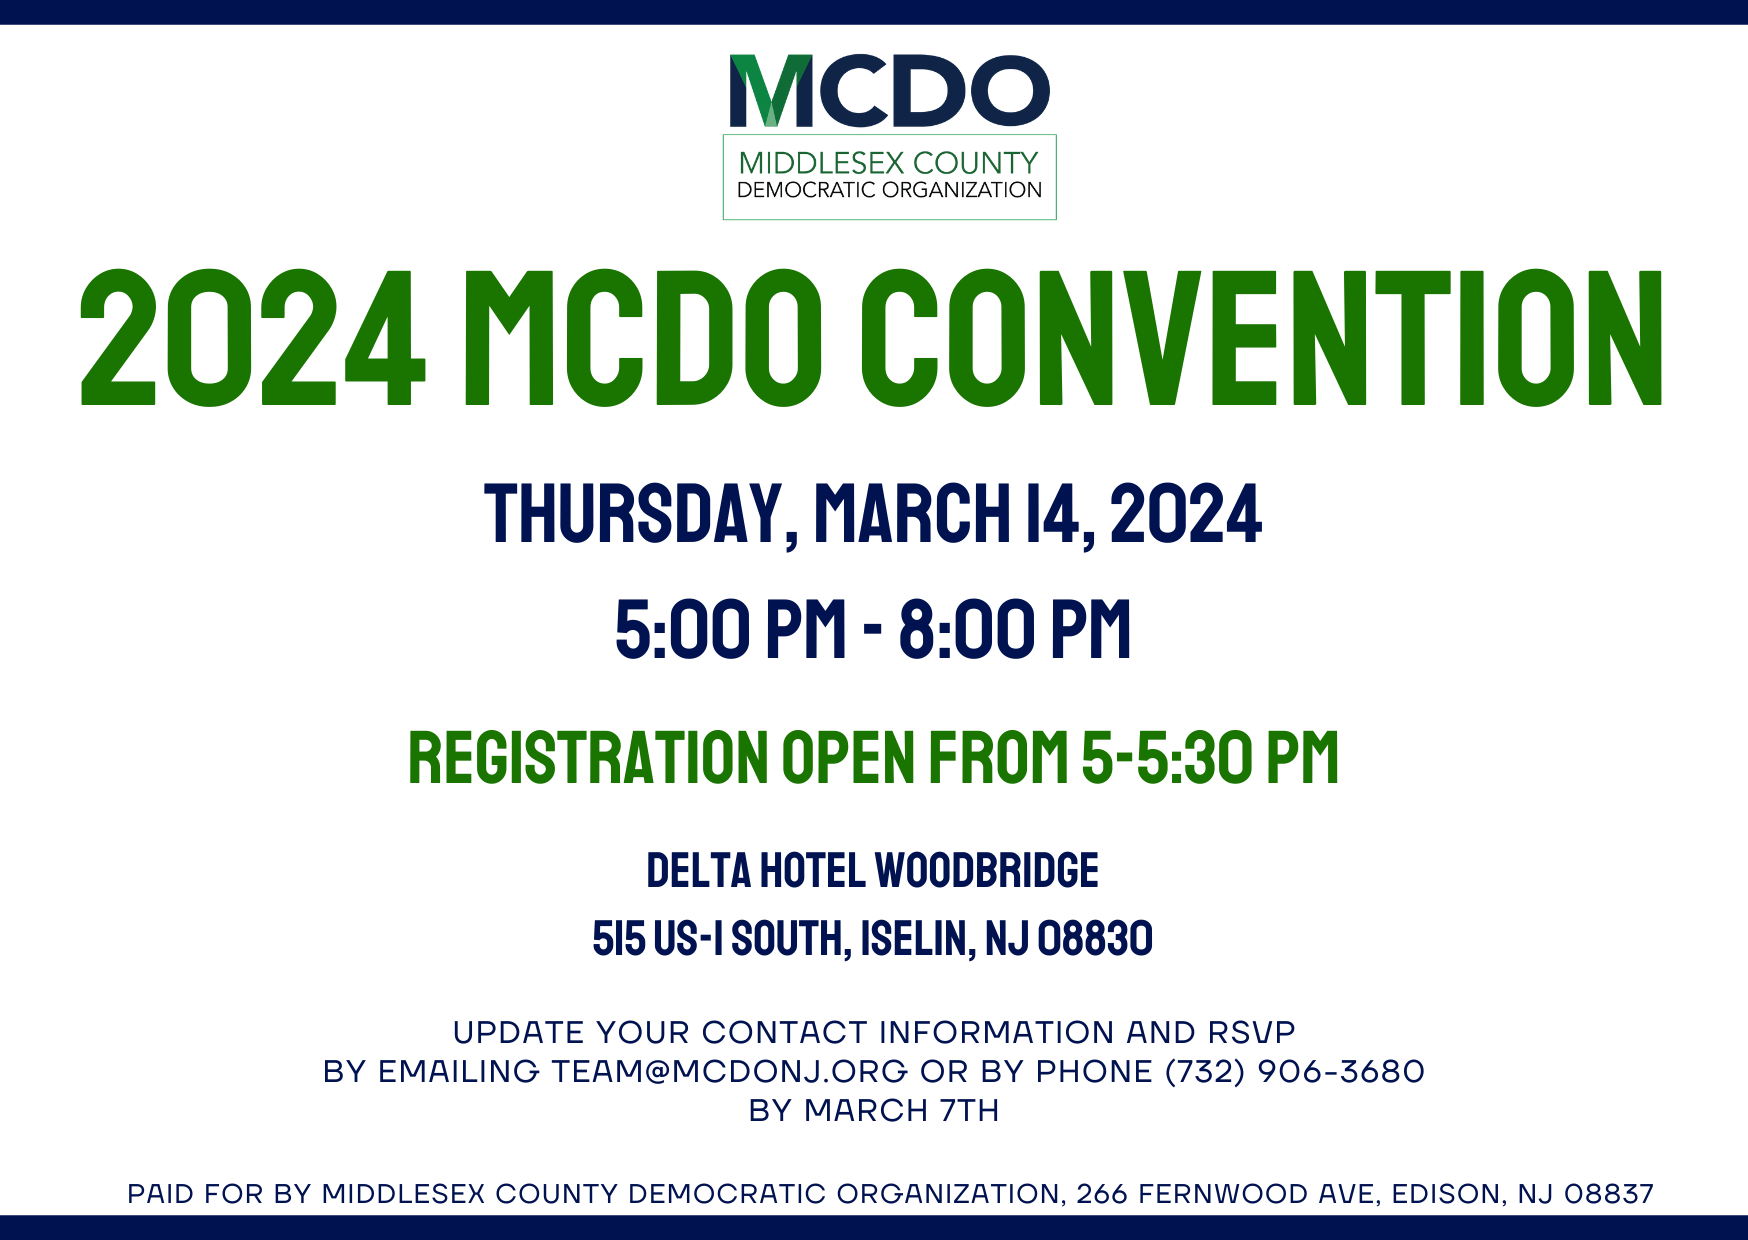 2024 MCDO Convention Save the Date